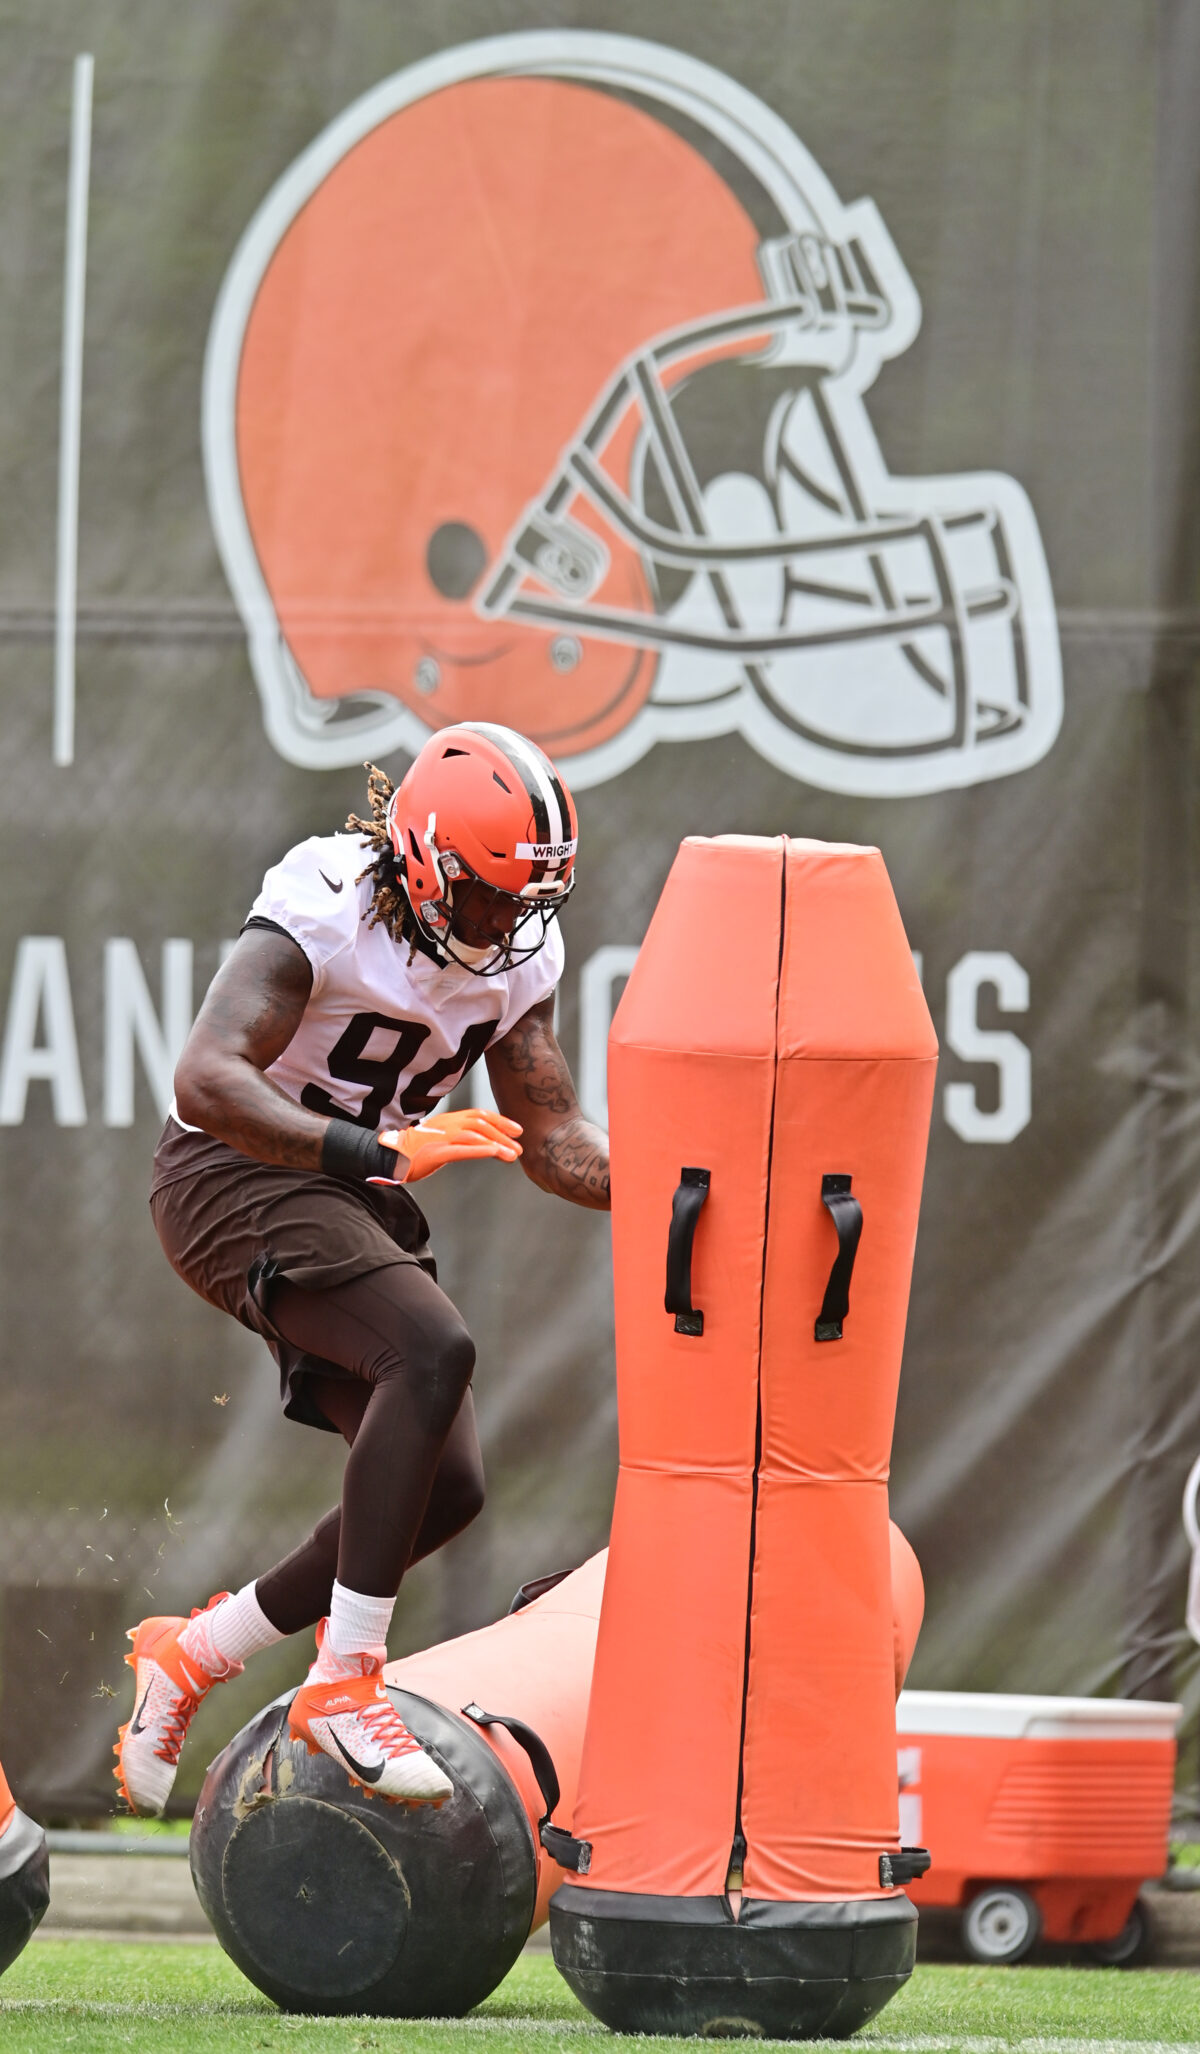 Look: Top photos from Browns OTAs including first looks at many new players